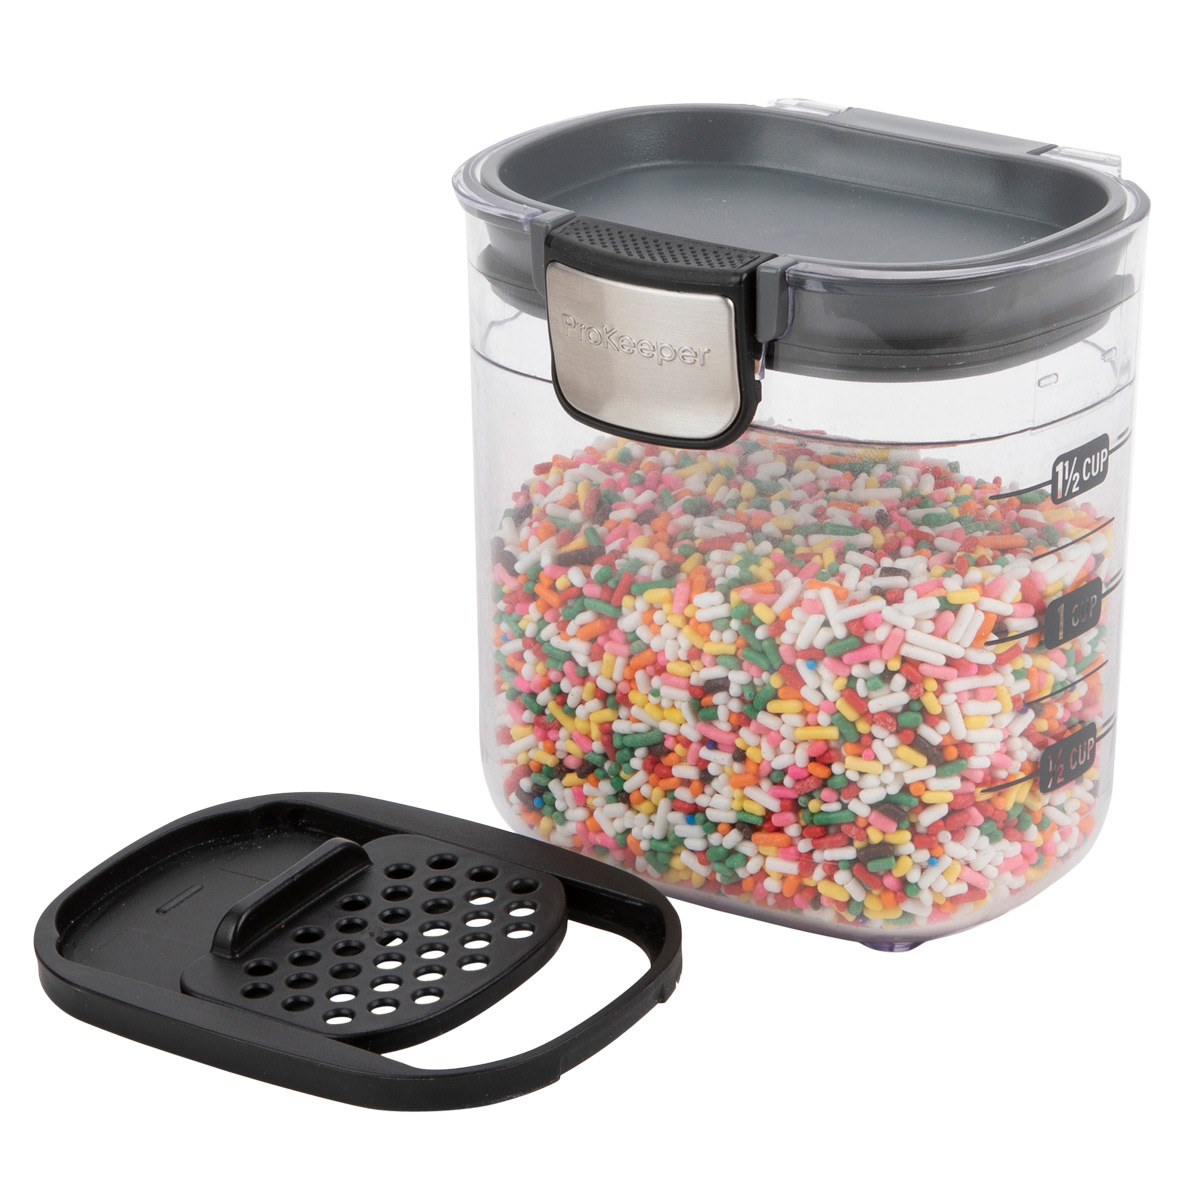 https://www.containerstore.com/catalogimages/403445/10083499-PKS-Mini-Container-Shaker-V.jpg